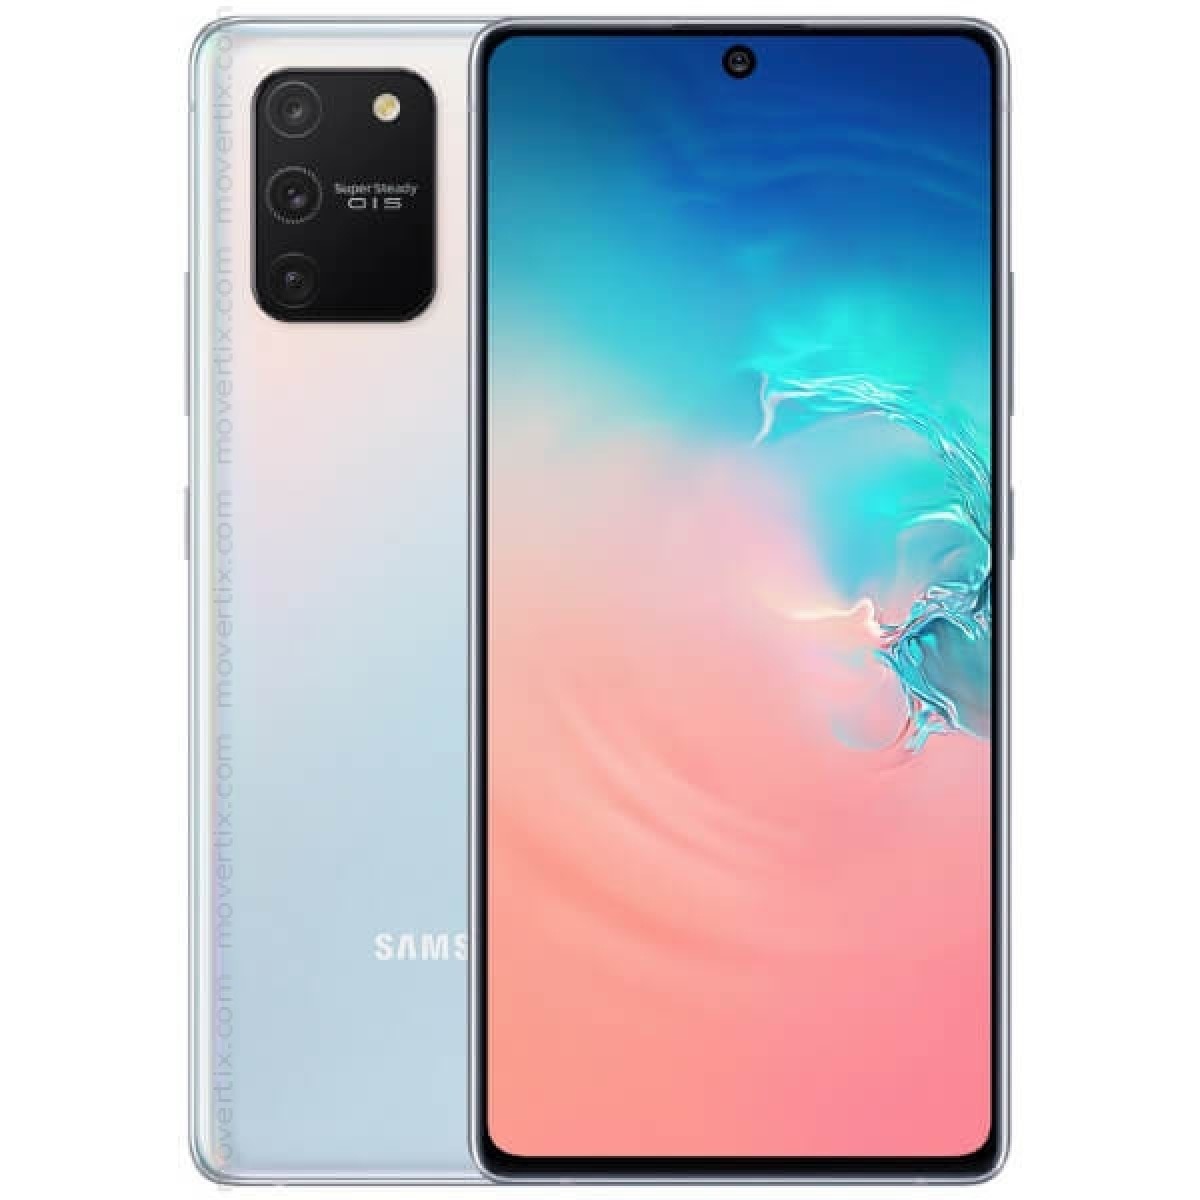 How To Transfer Photos From Samsung Galaxy S10 To Syncios